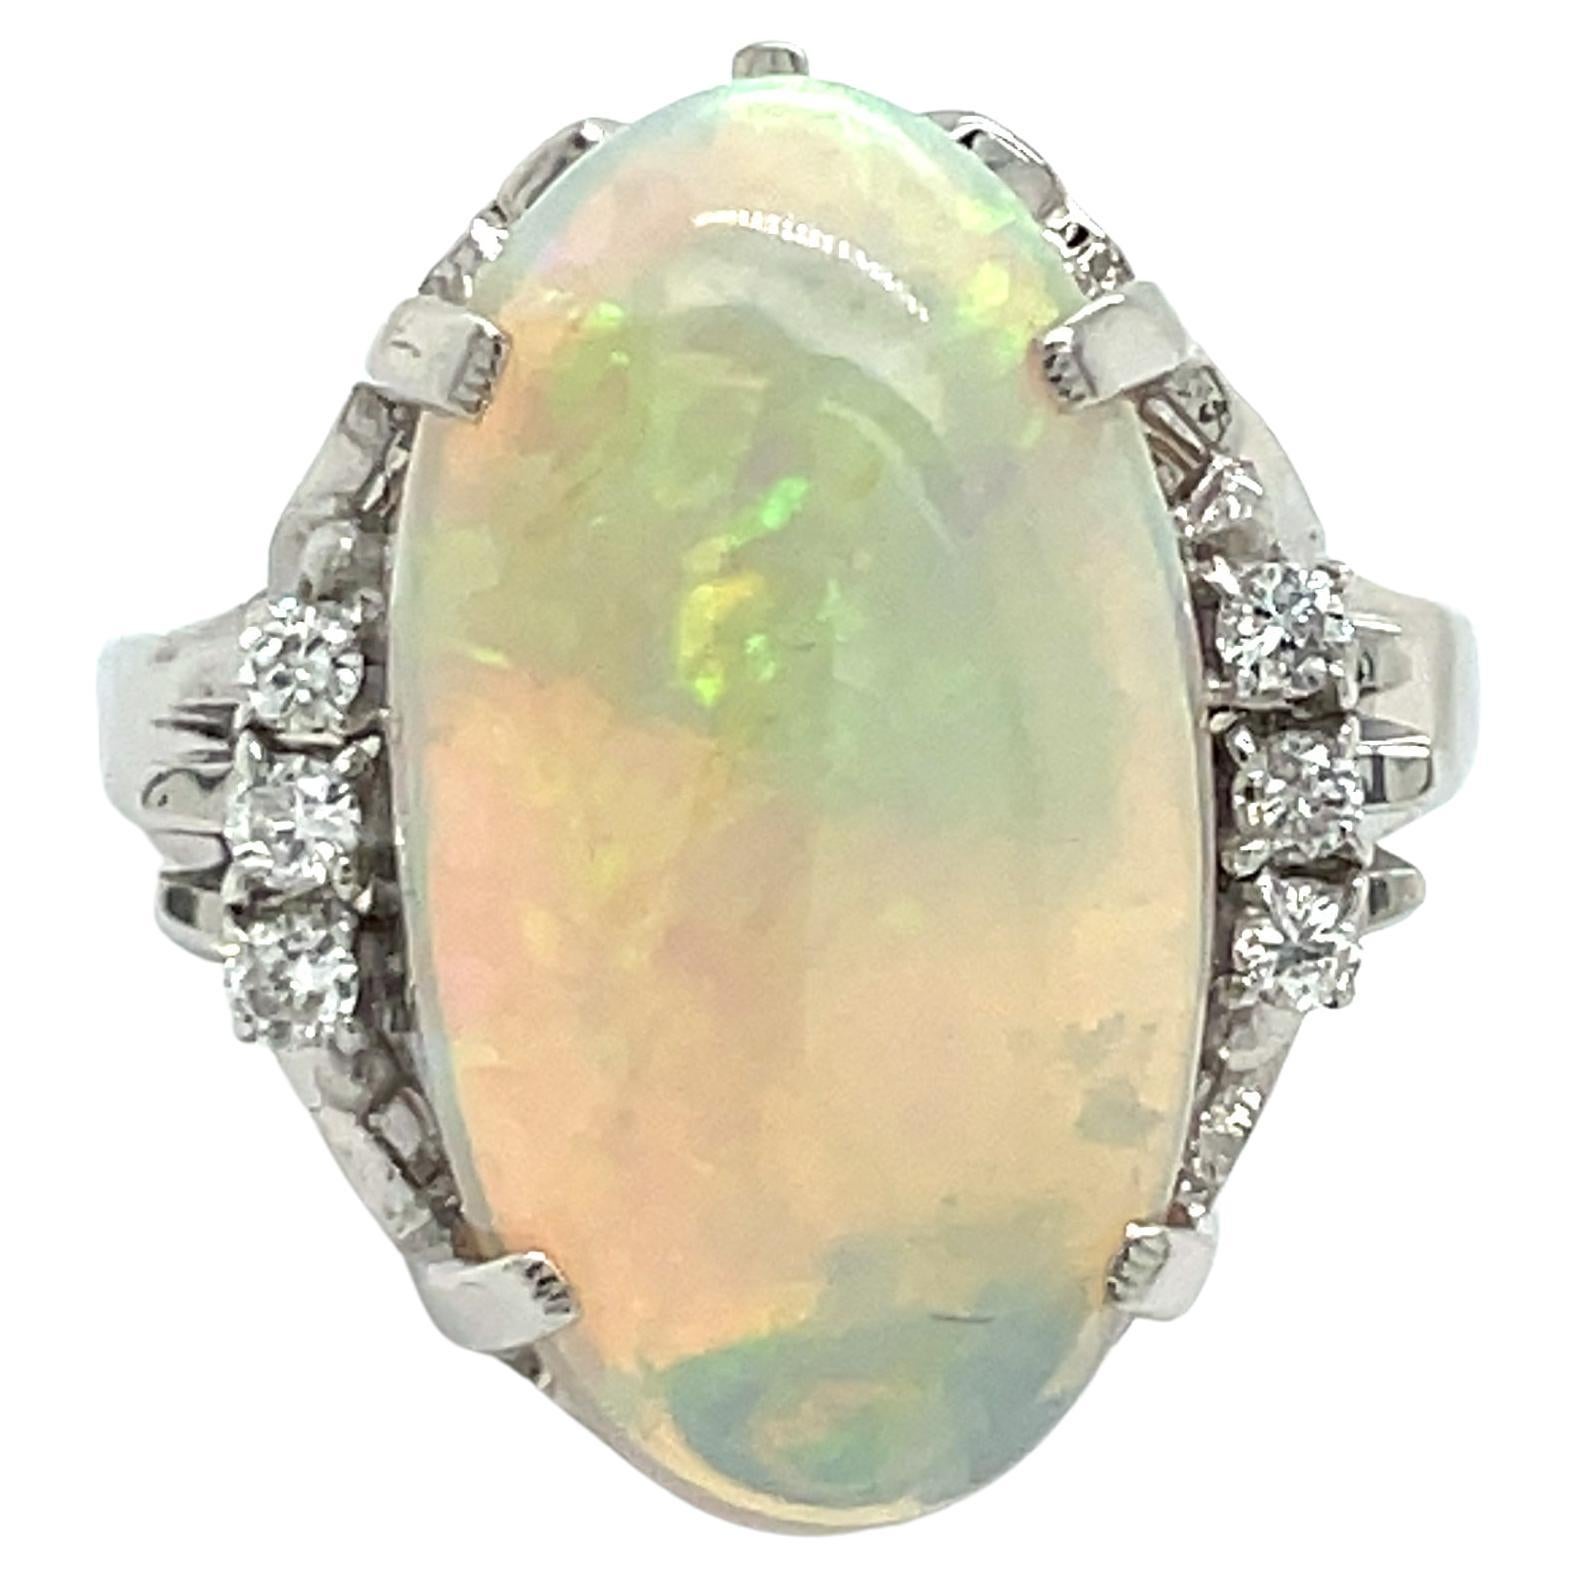 Large classic styled 6.01 ct oval opal, diamond and platinum ring.  Just the right size for a right hand ring. This one of a kind opal shines brilliantly at every angle, reflecting an array of colors.  Set in 9.50 grams of platinum.  Surrounded by